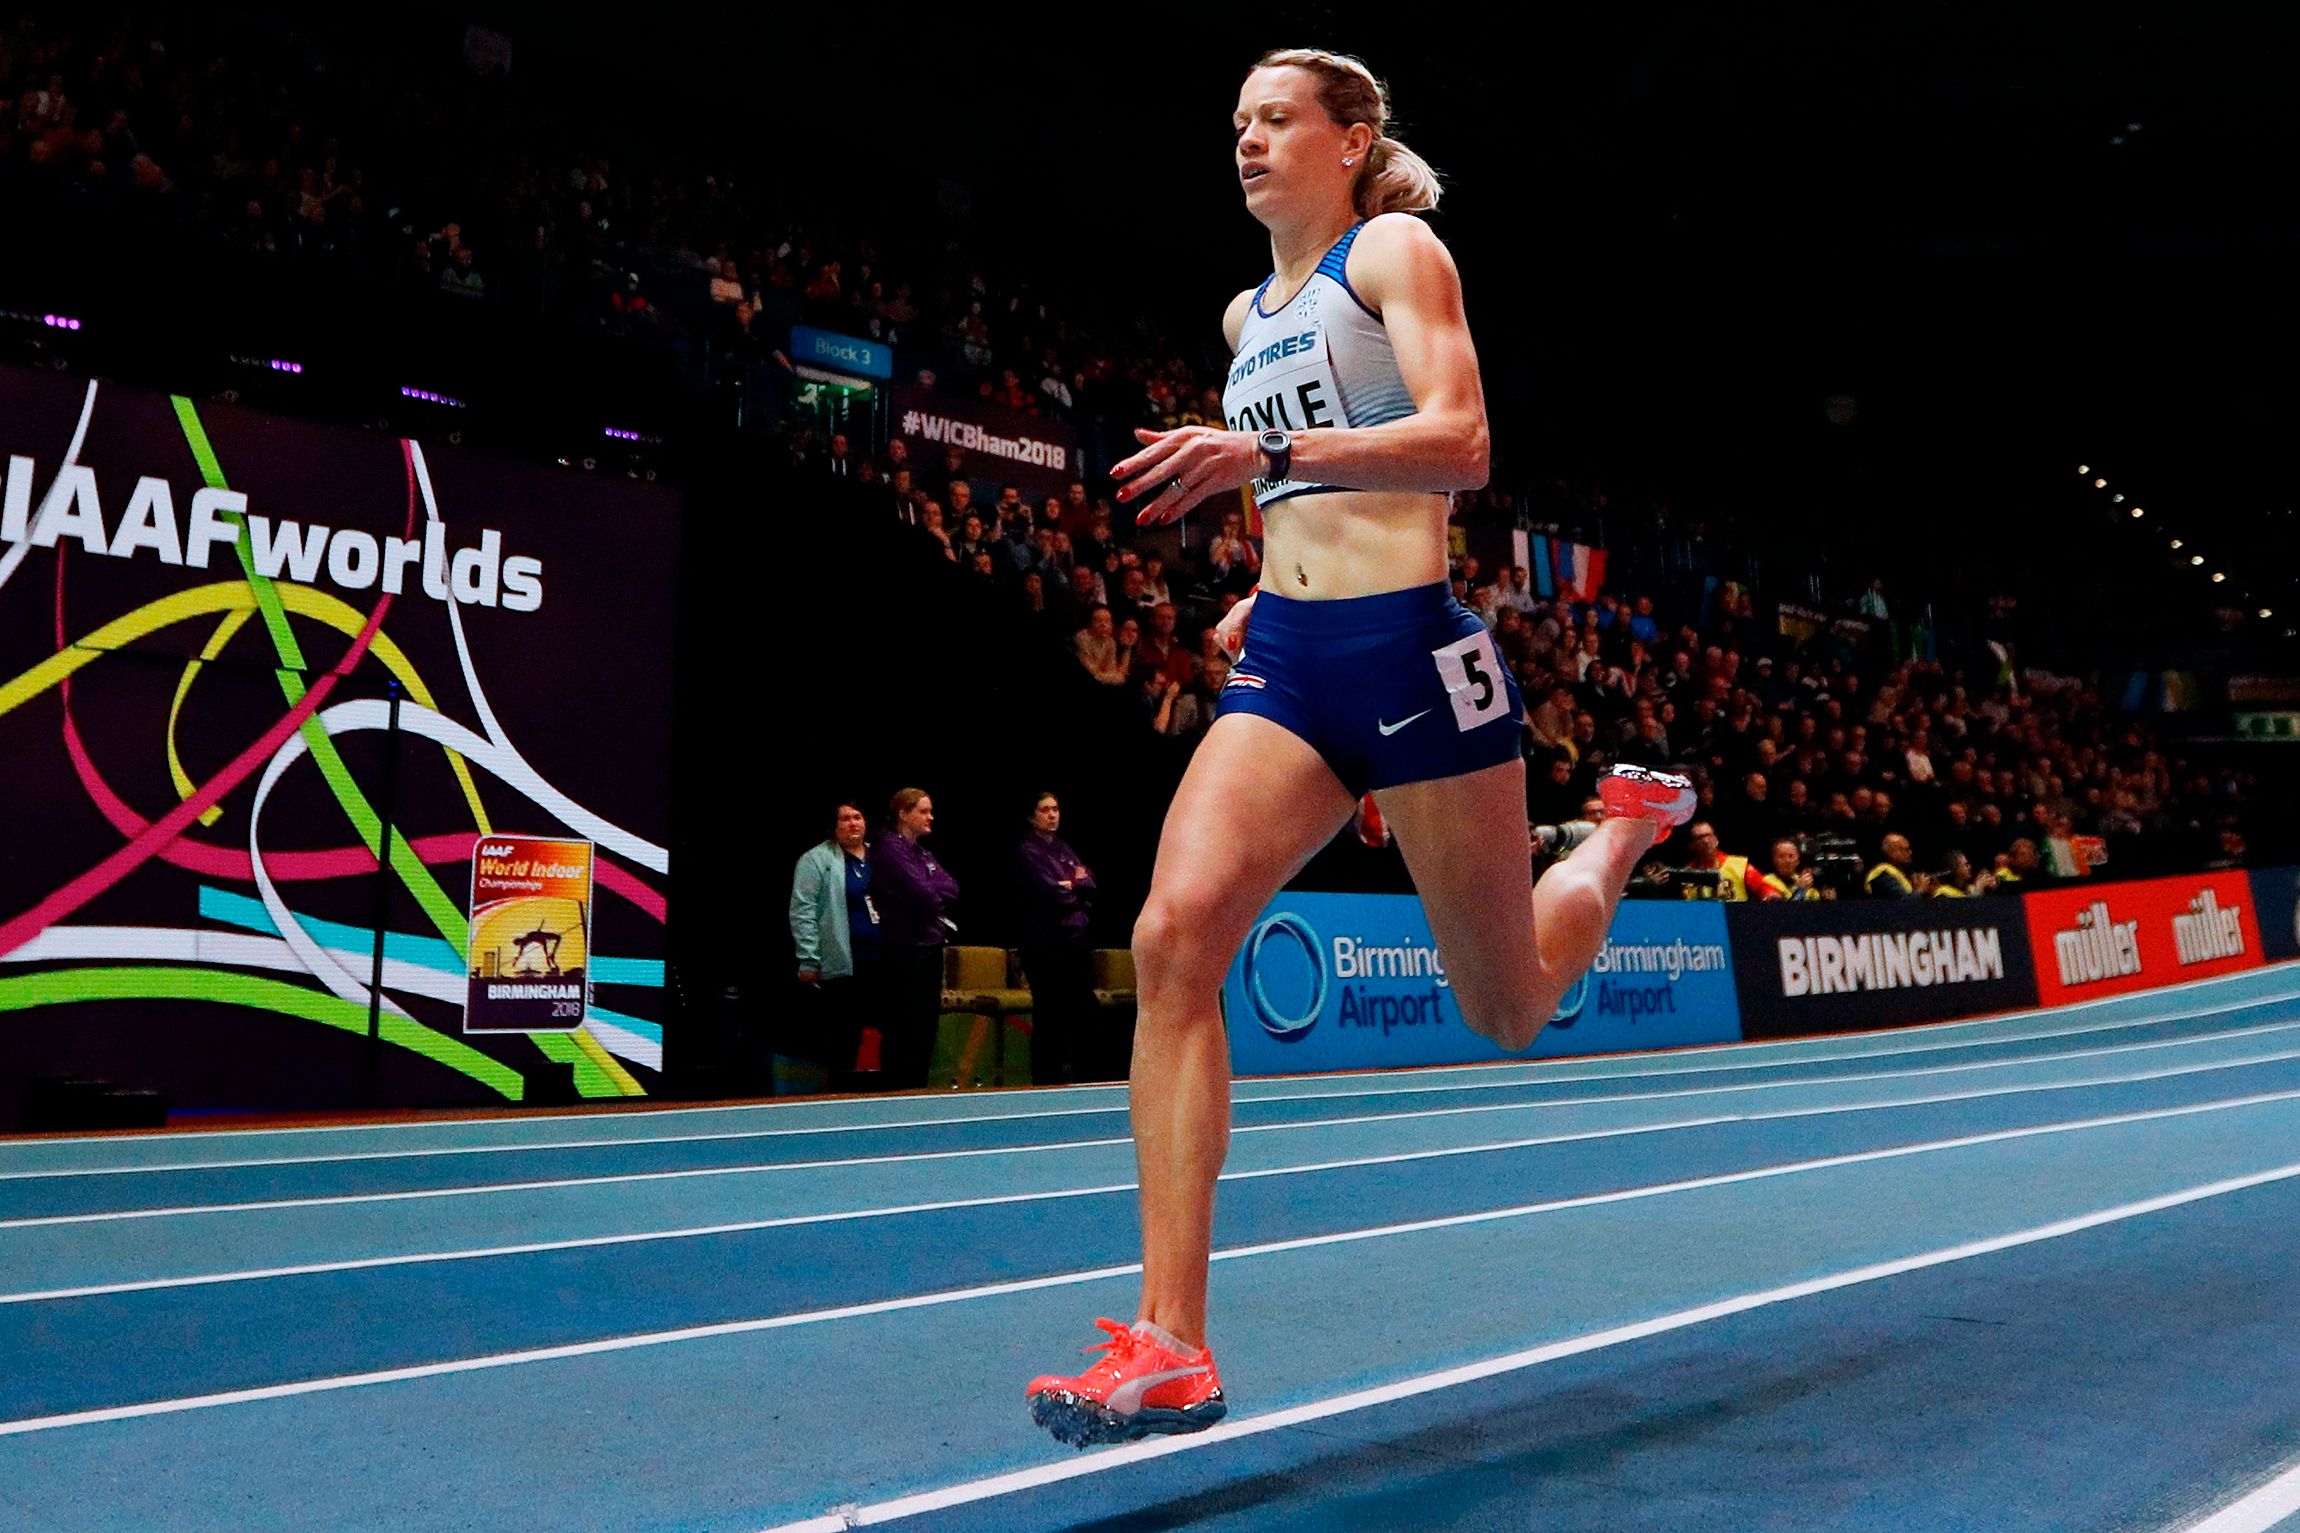 Eilidh Doyle in action at the 2018 World Indoor Championships in Birmingham